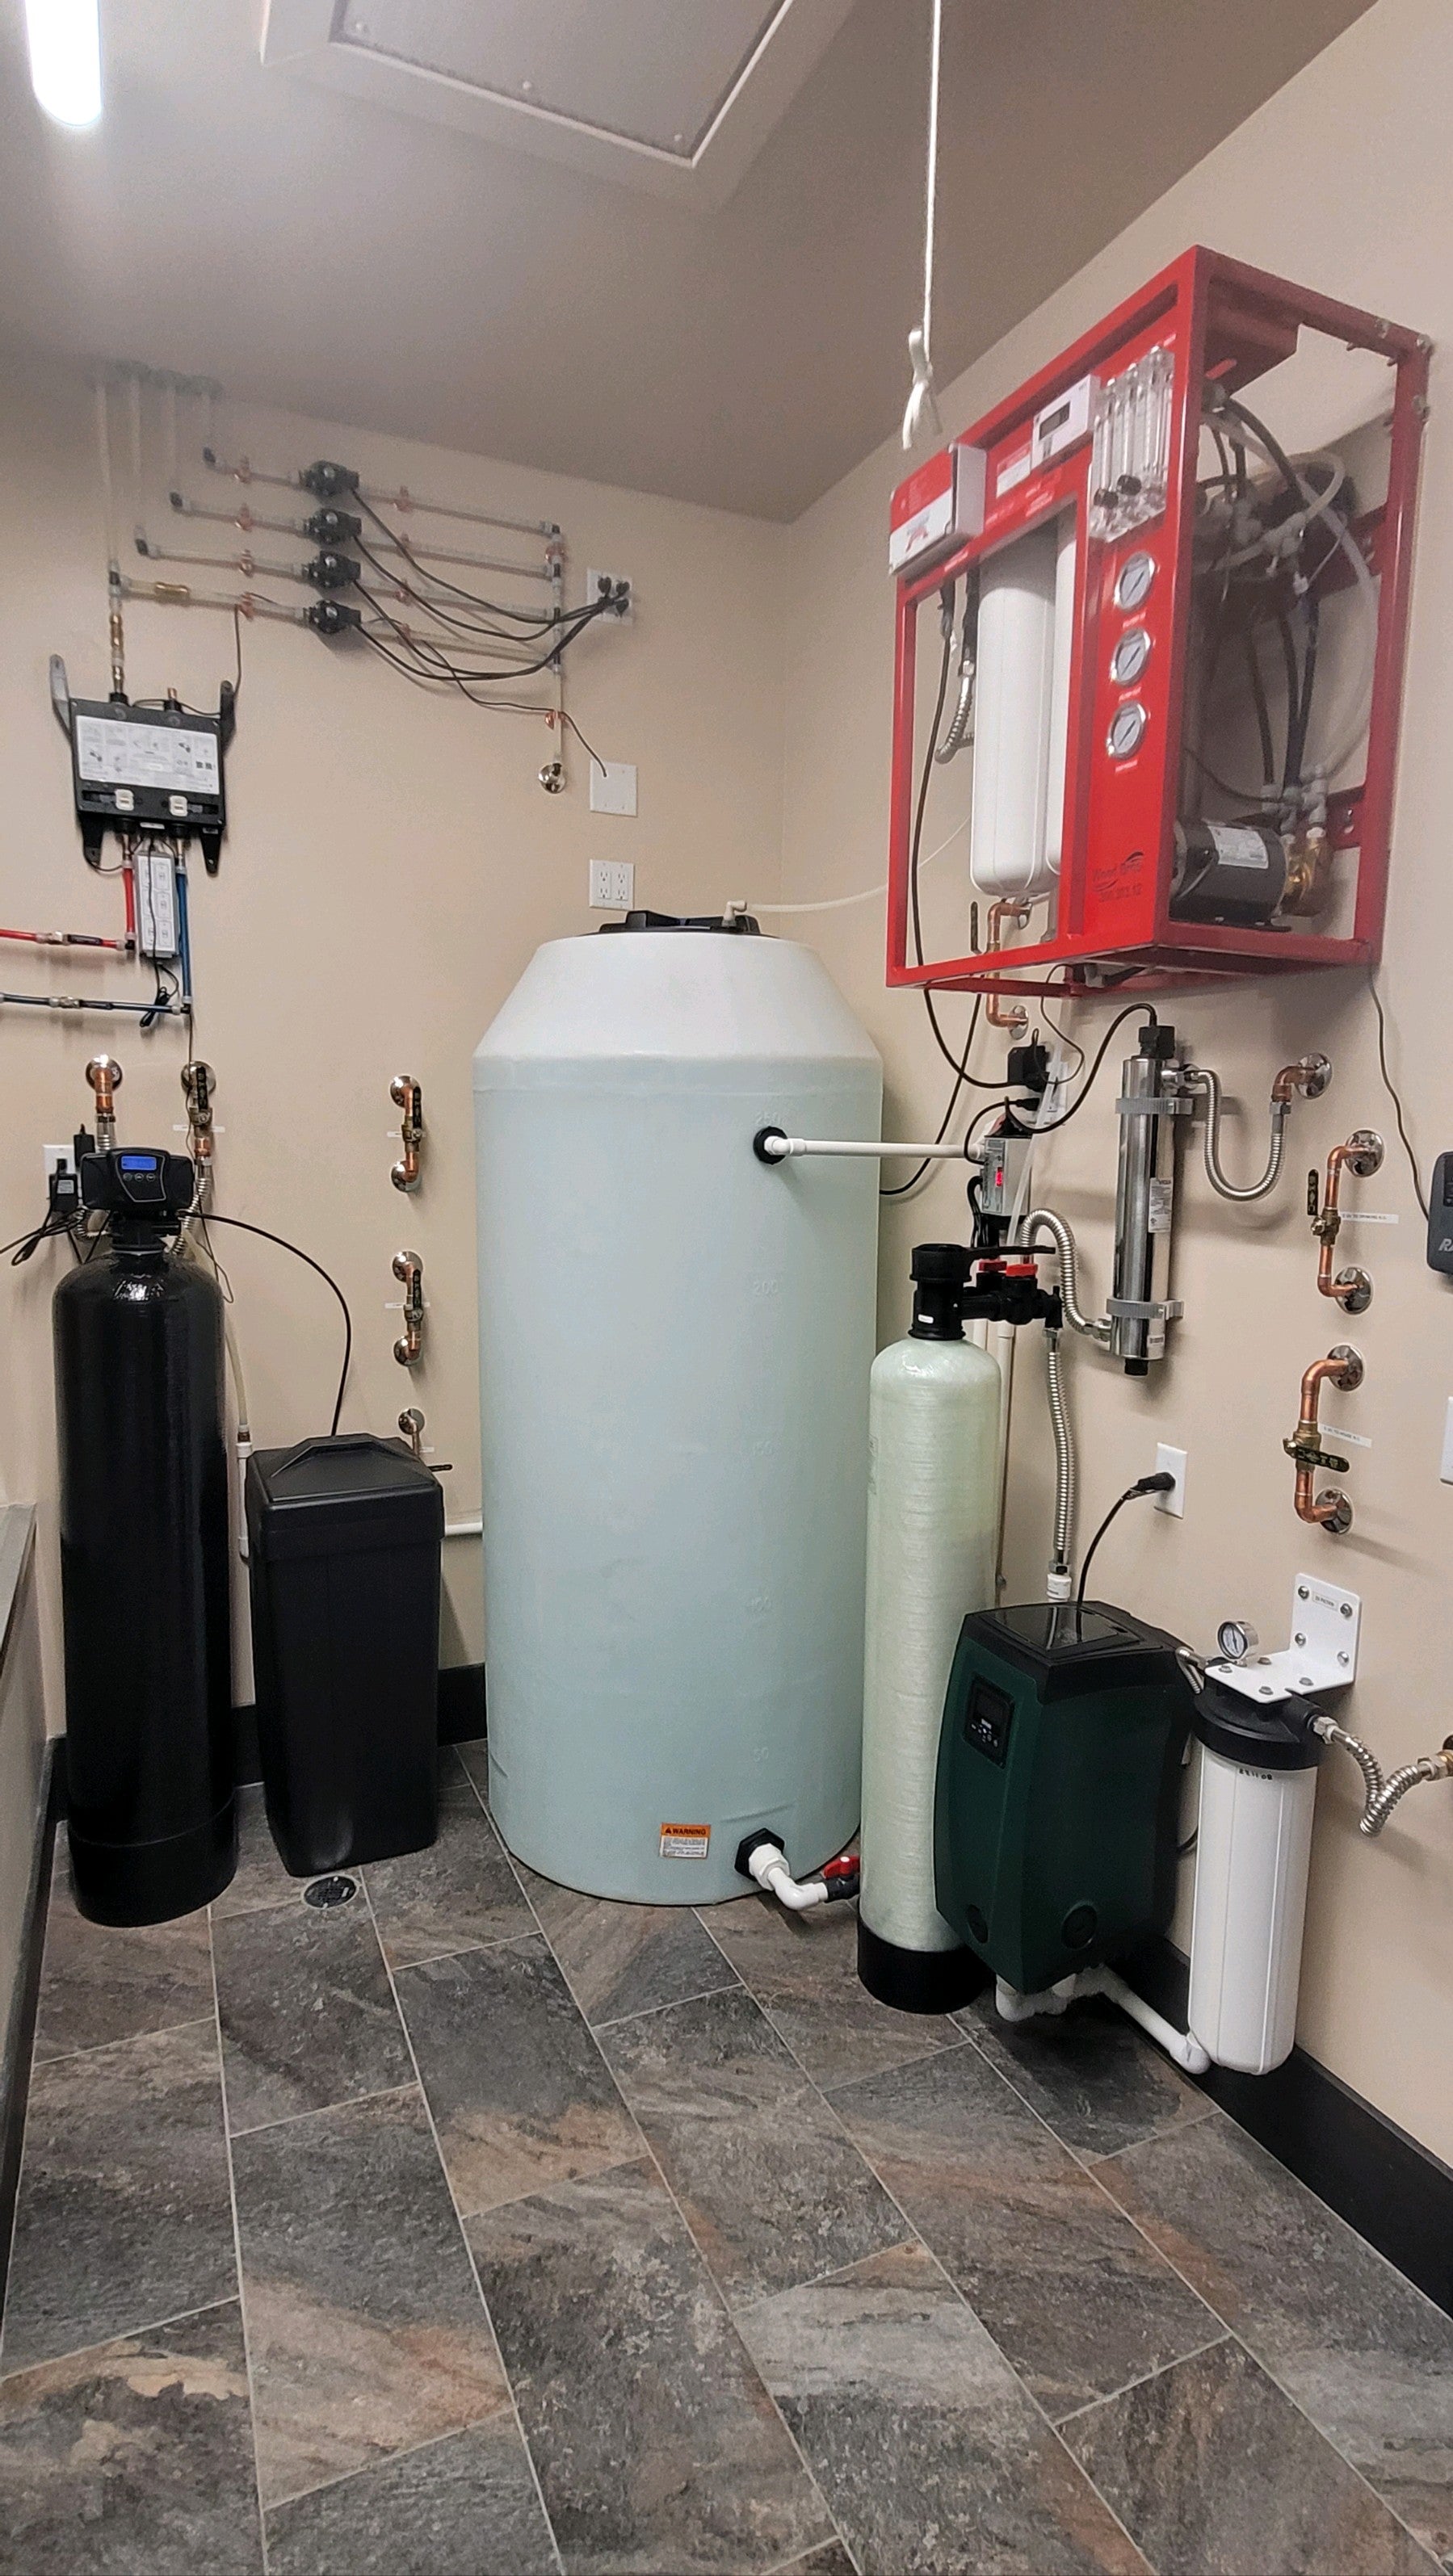 2000 GPD Whole House Reverse Osmosis Water System with Tank and Post Treatment